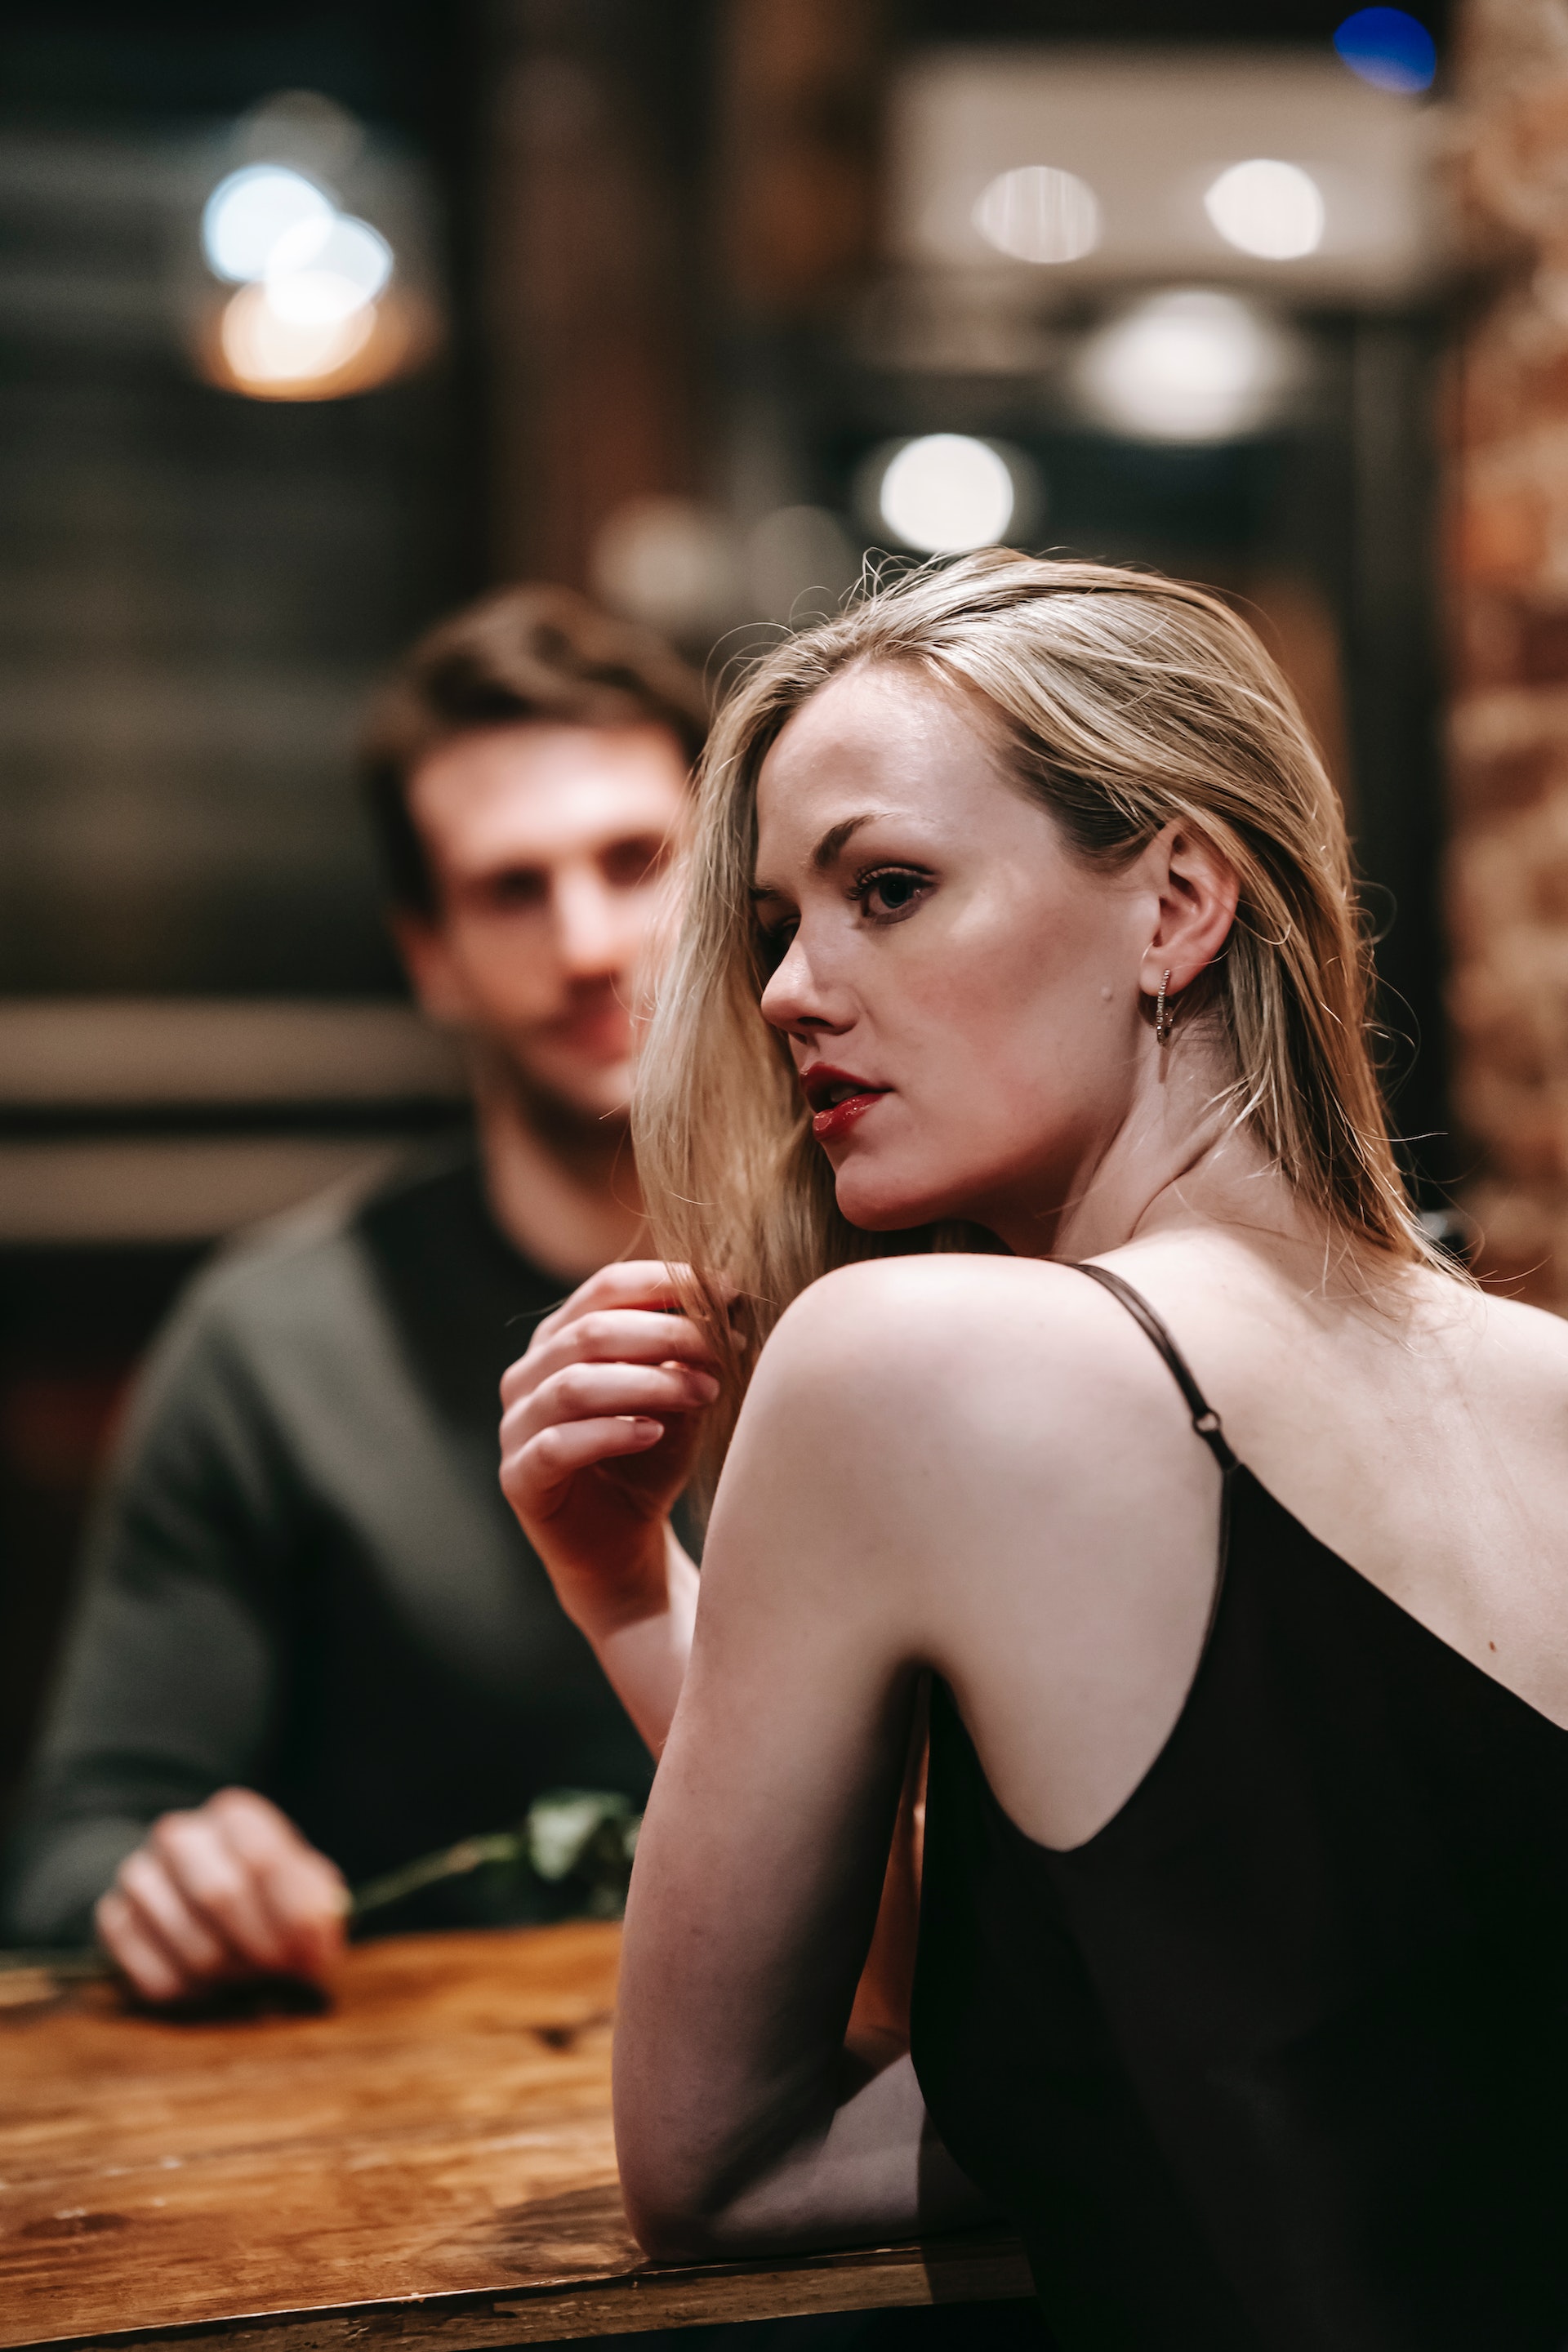 A man and a woman in a restaurant | Source: Pexels